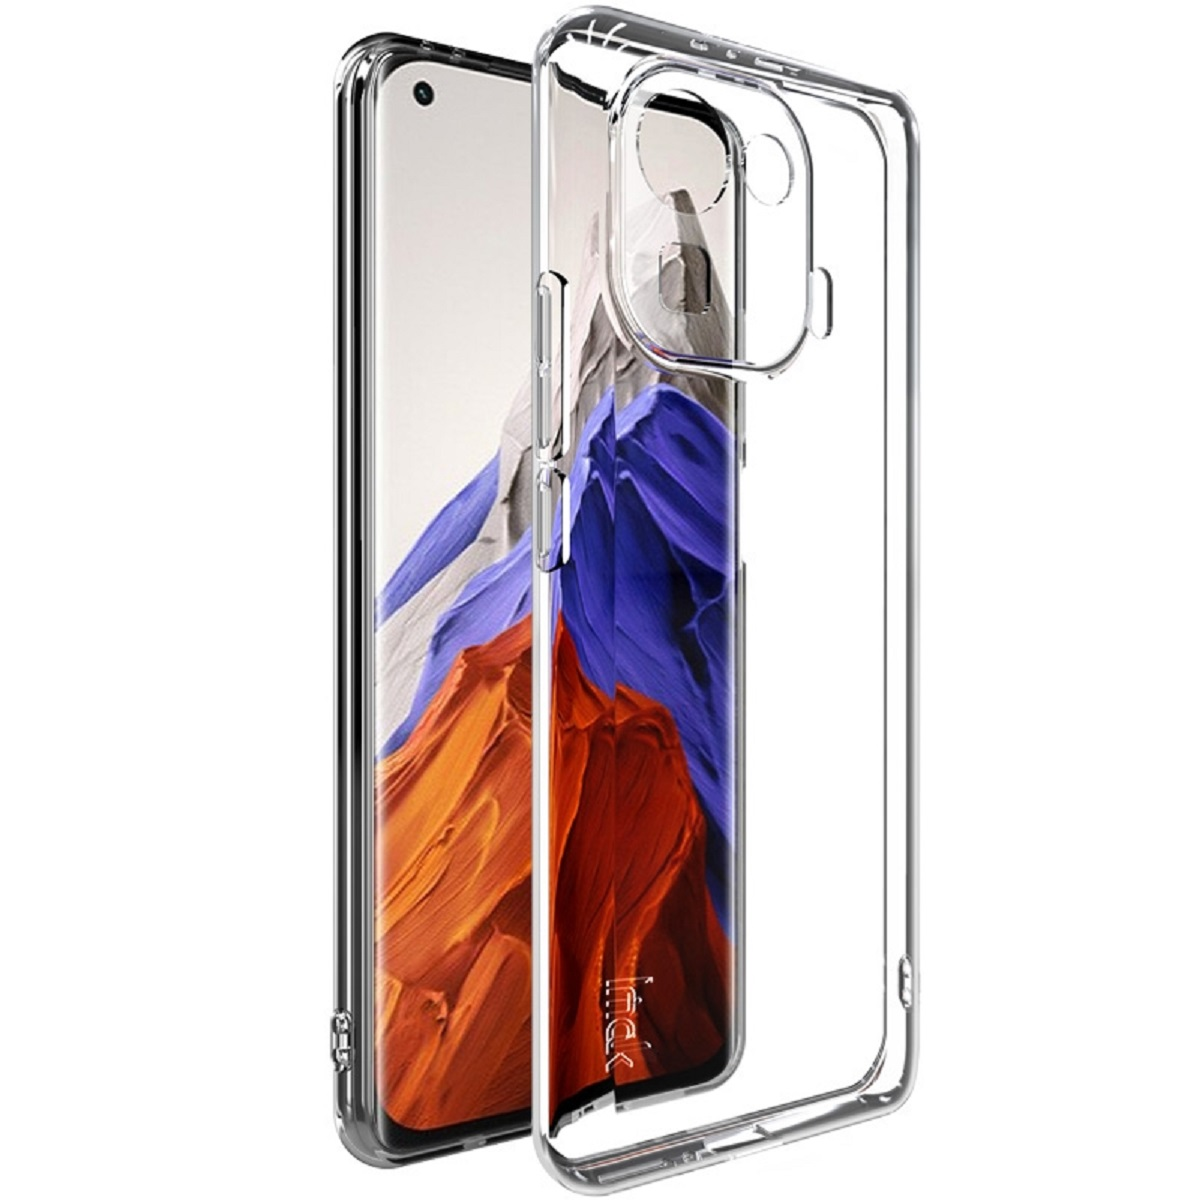 Hülle, 11 Backcover, Mi Transparent Xiaomi, Backcover, Pro, PROTECTORKING